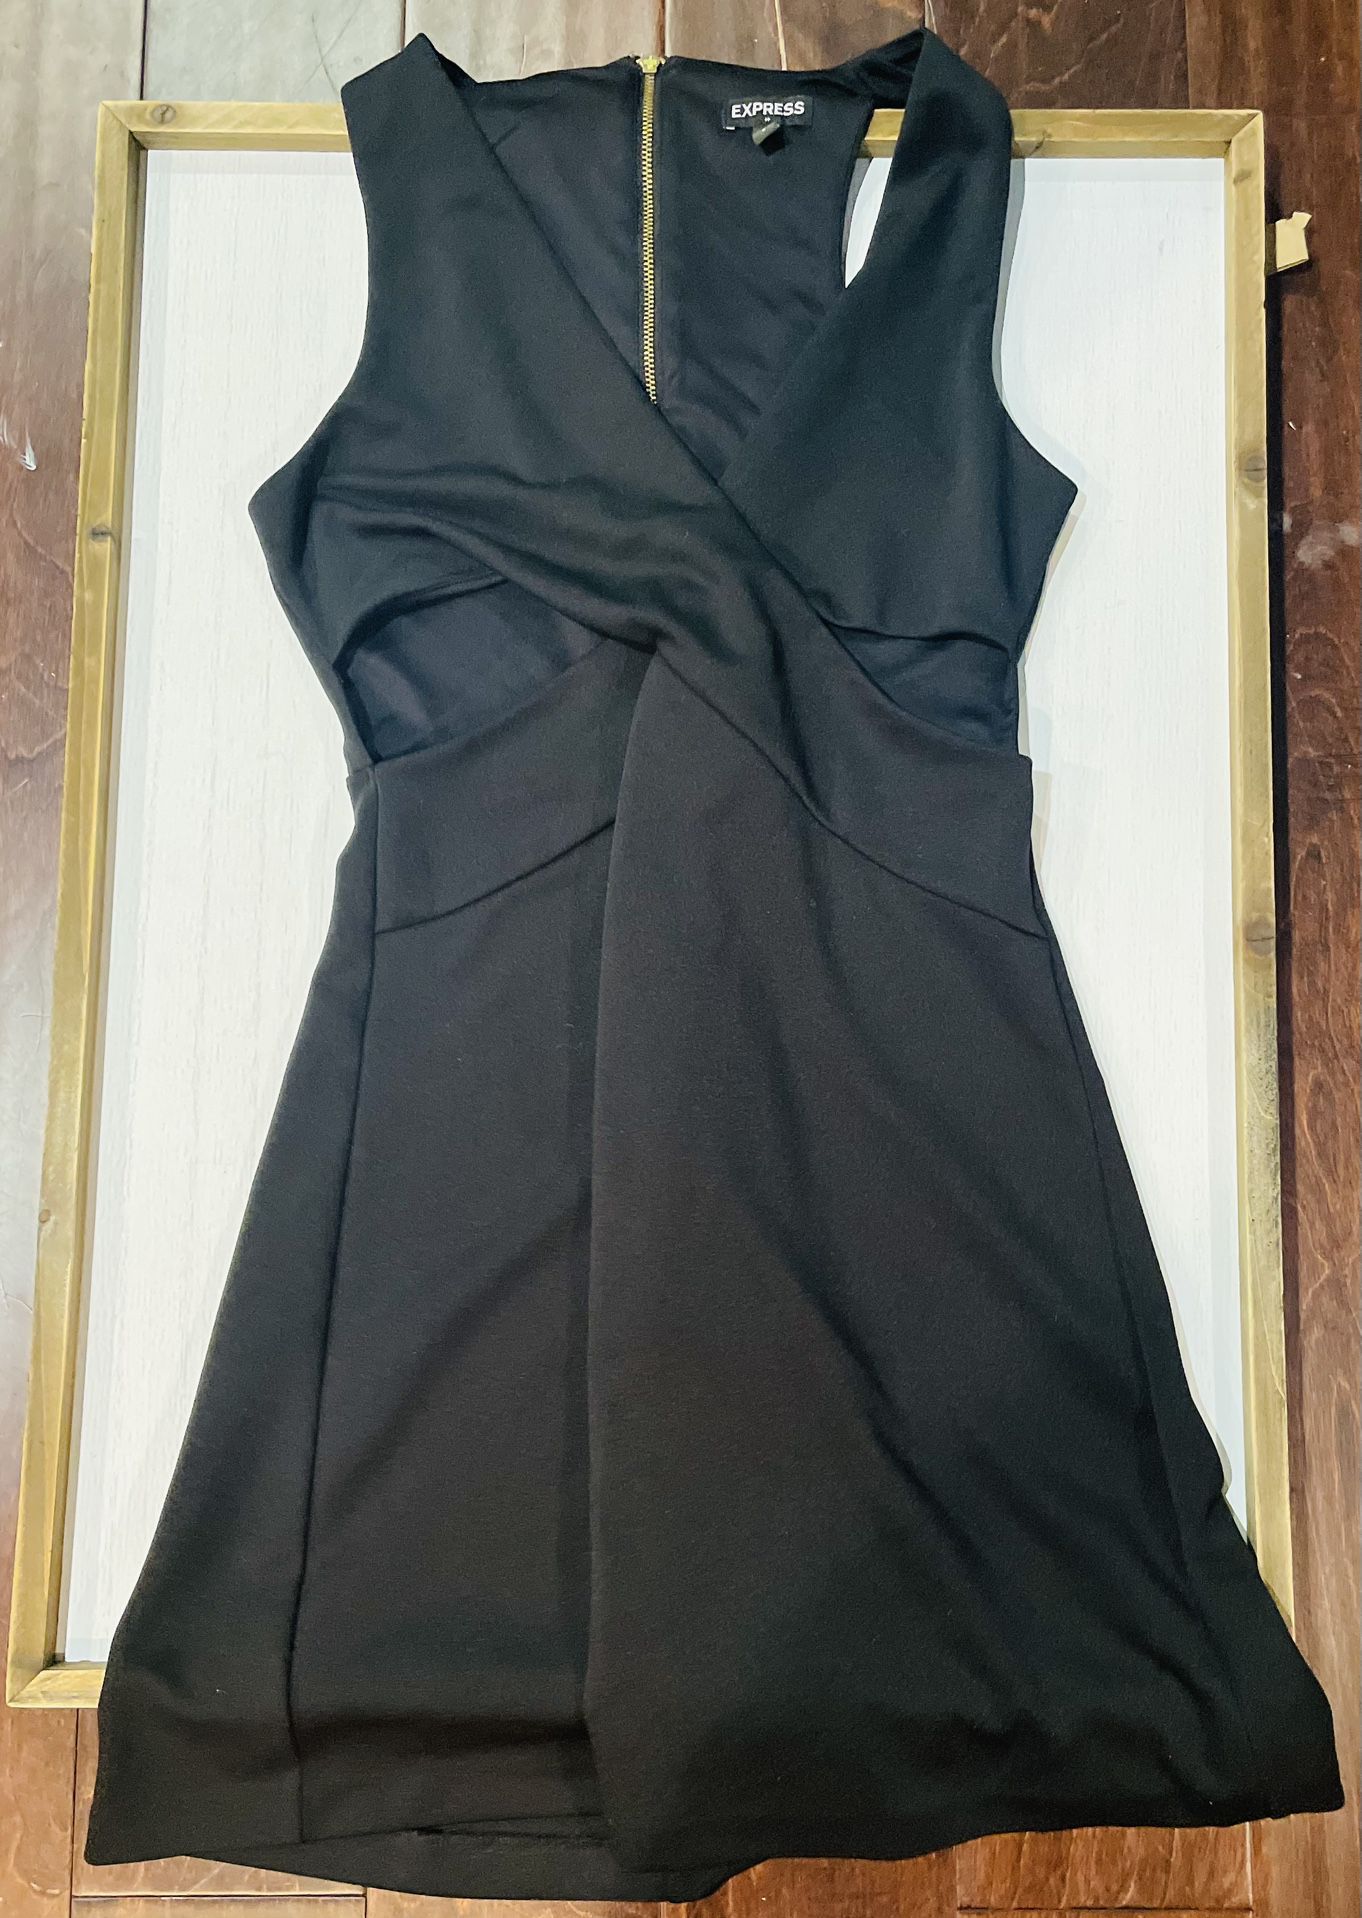 Express Women’s Size 8 Black Low Cut Dress; 93% Polyester & 7% Spandex; 32” in Height